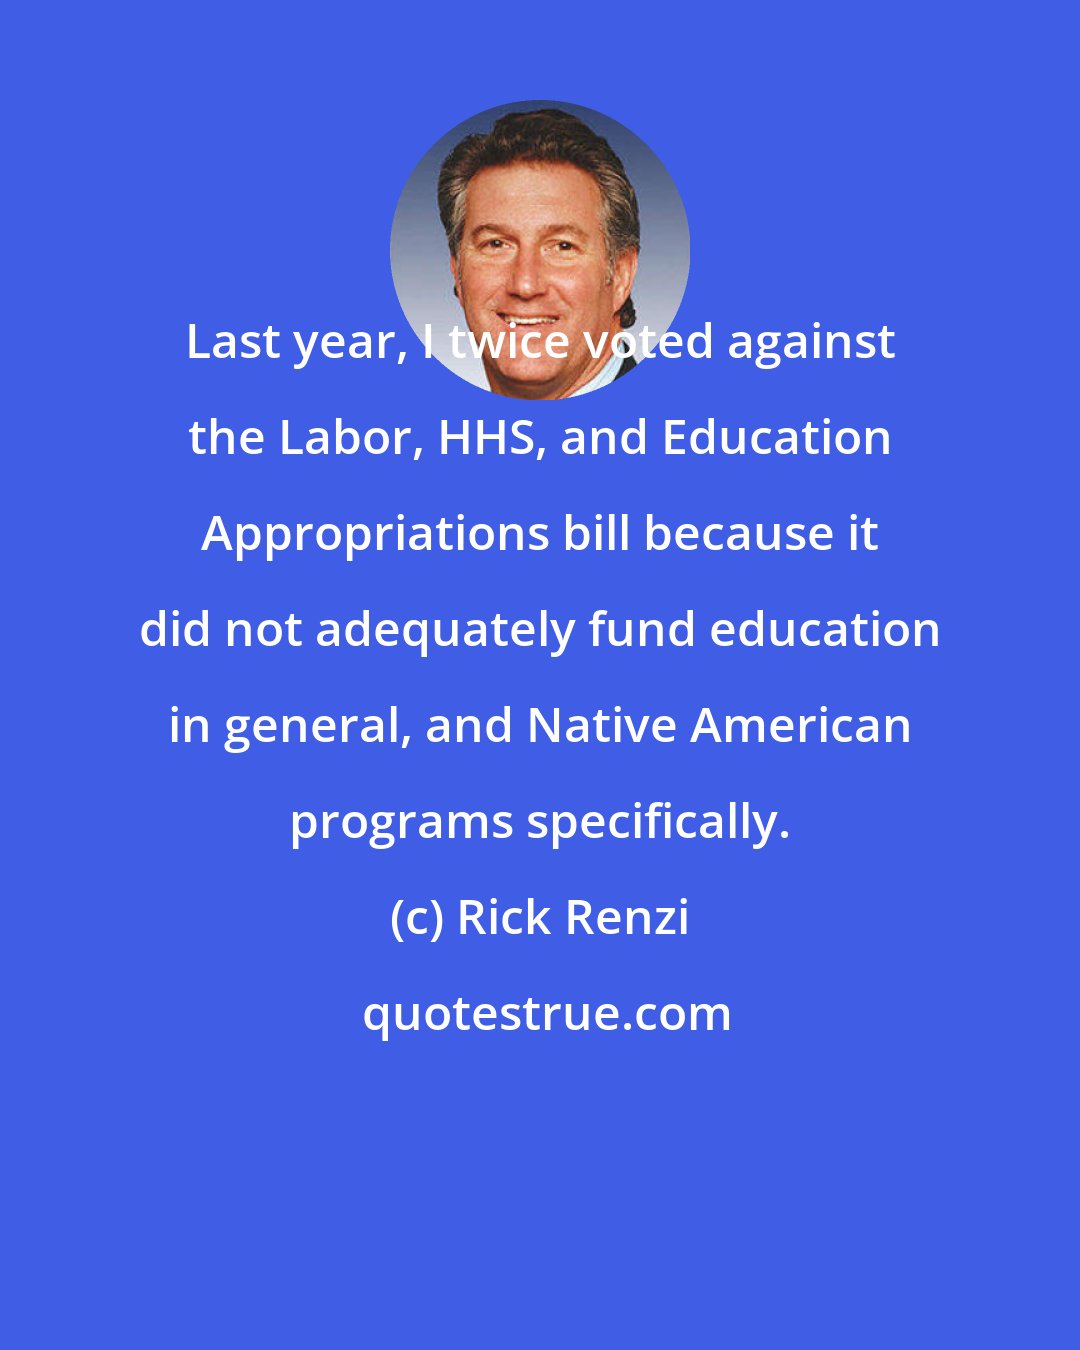 Rick Renzi: Last year, I twice voted against the Labor, HHS, and Education Appropriations bill because it did not adequately fund education in general, and Native American programs specifically.